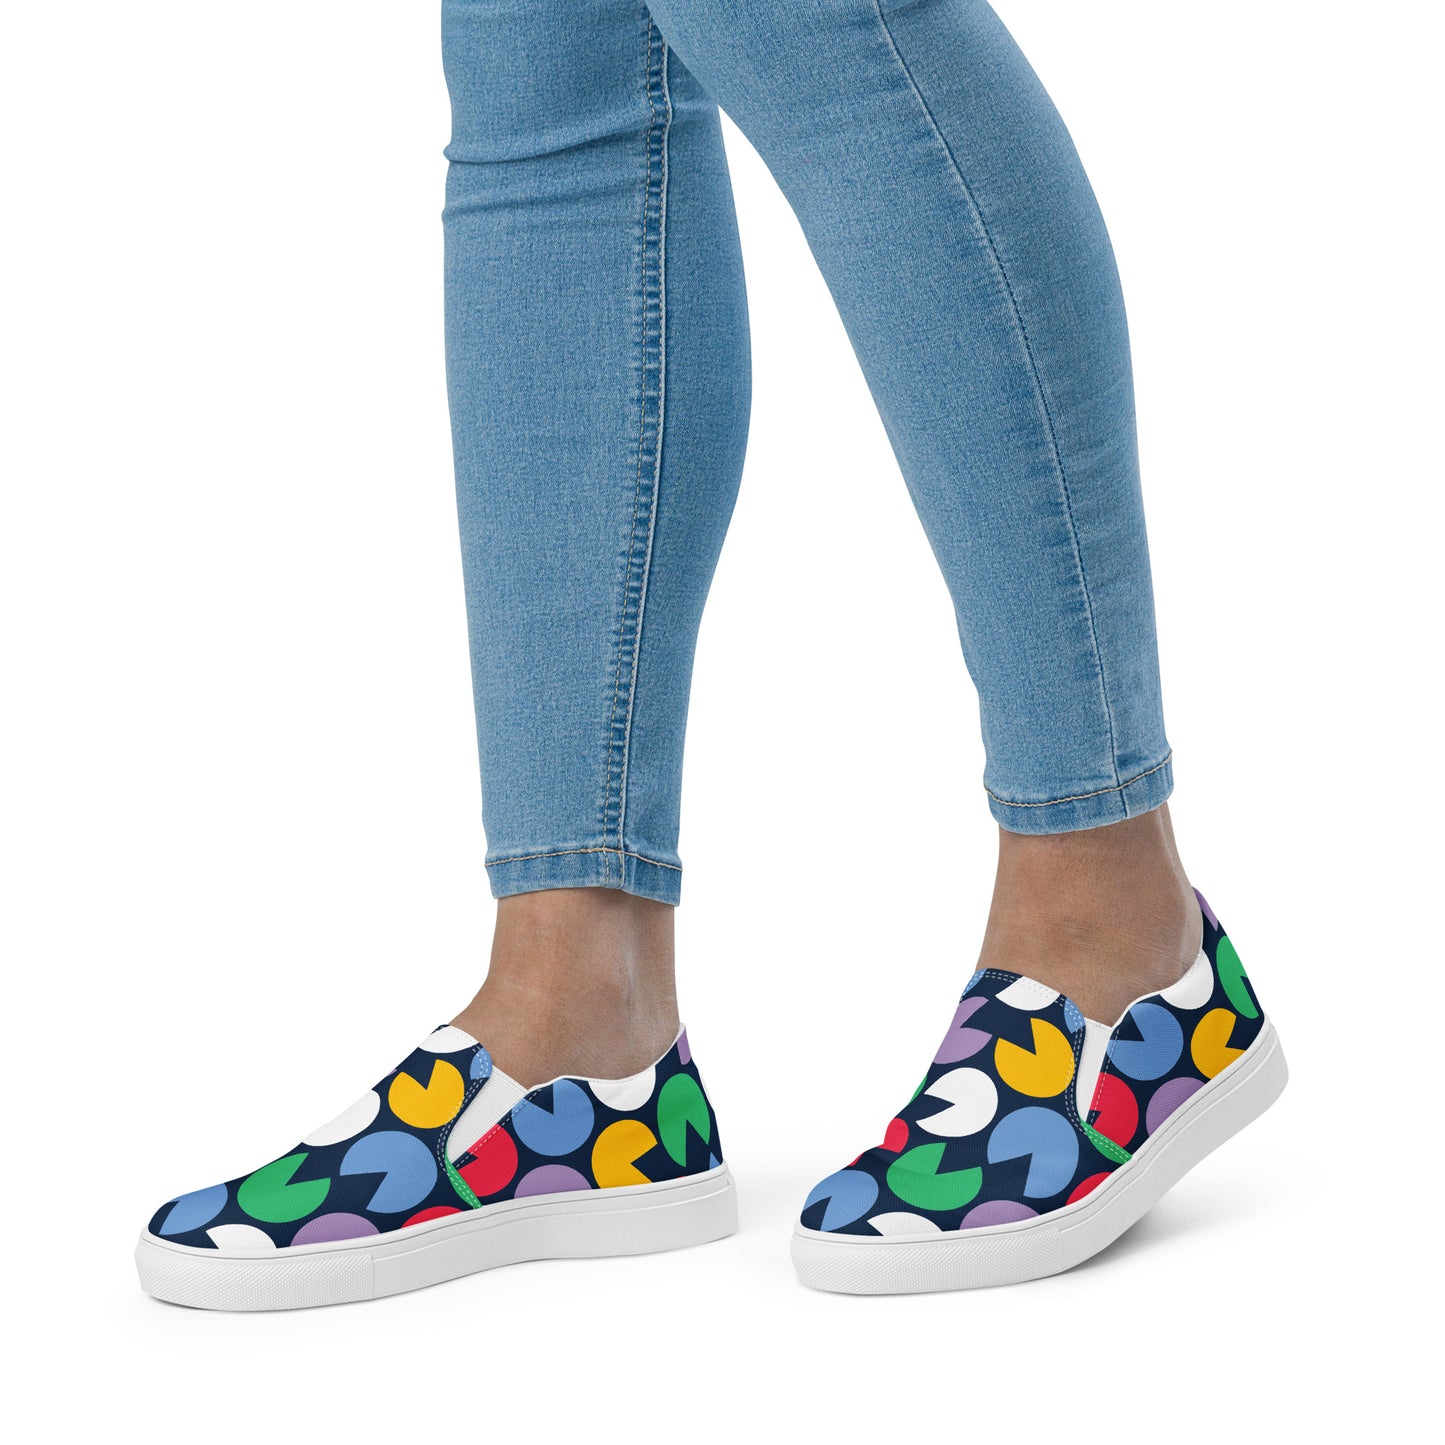 Hungry Circles - Women’s slip-on canvas shoes Womens Slip On Shoes